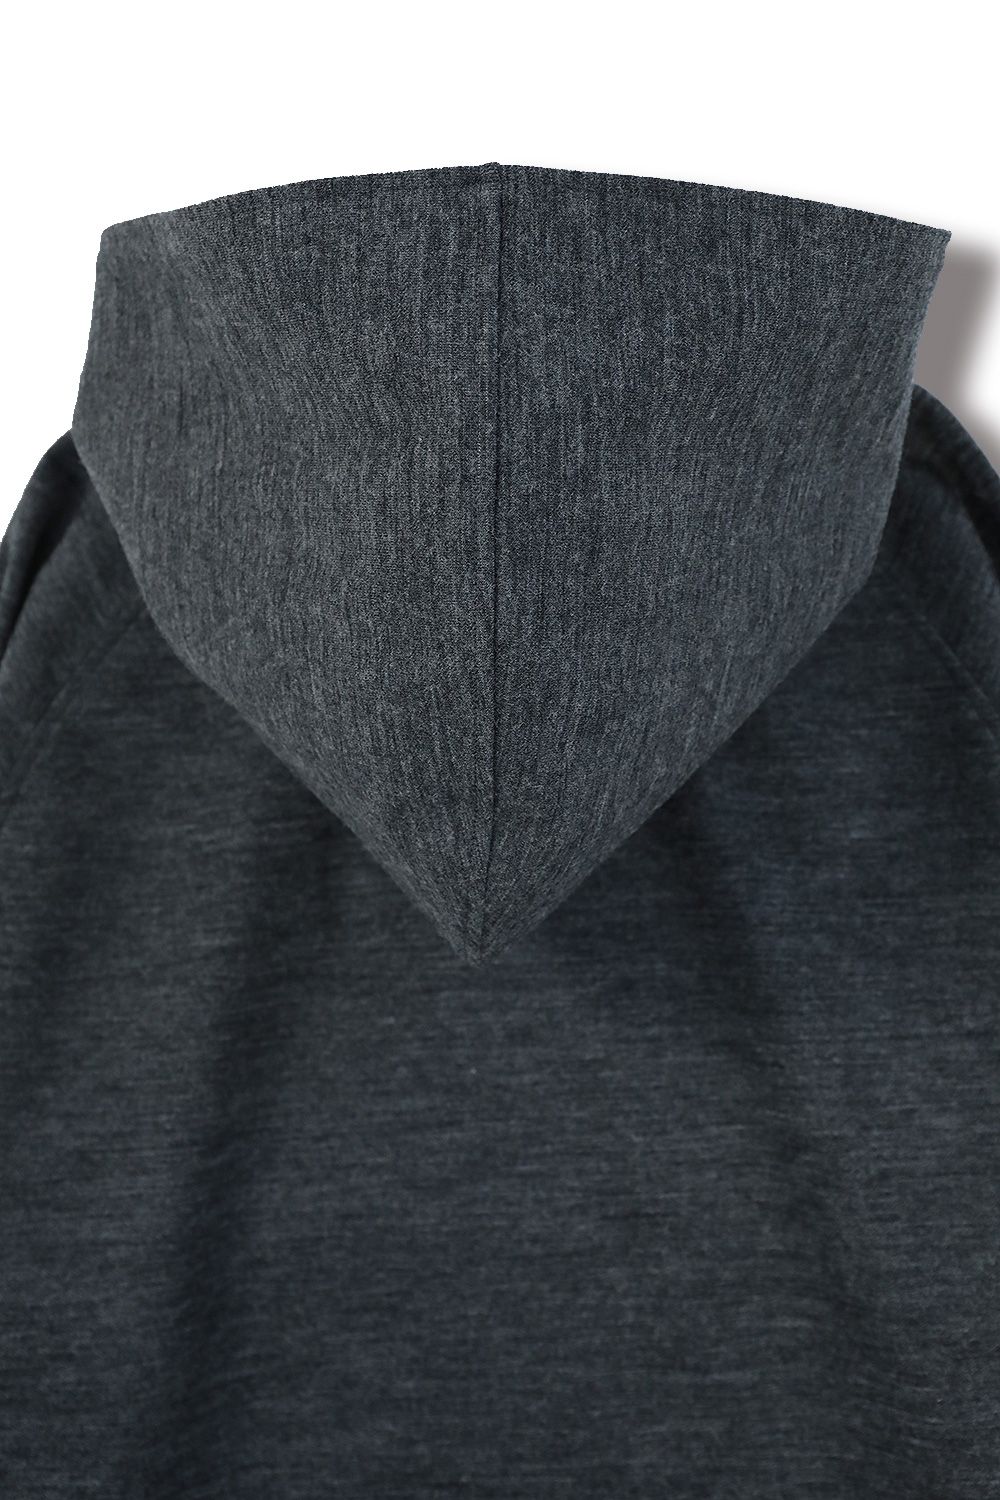 THE RERACS - 【23AW/ラスト1点】RERACS HALF ZIP HOODED PULLOVER(TOP 